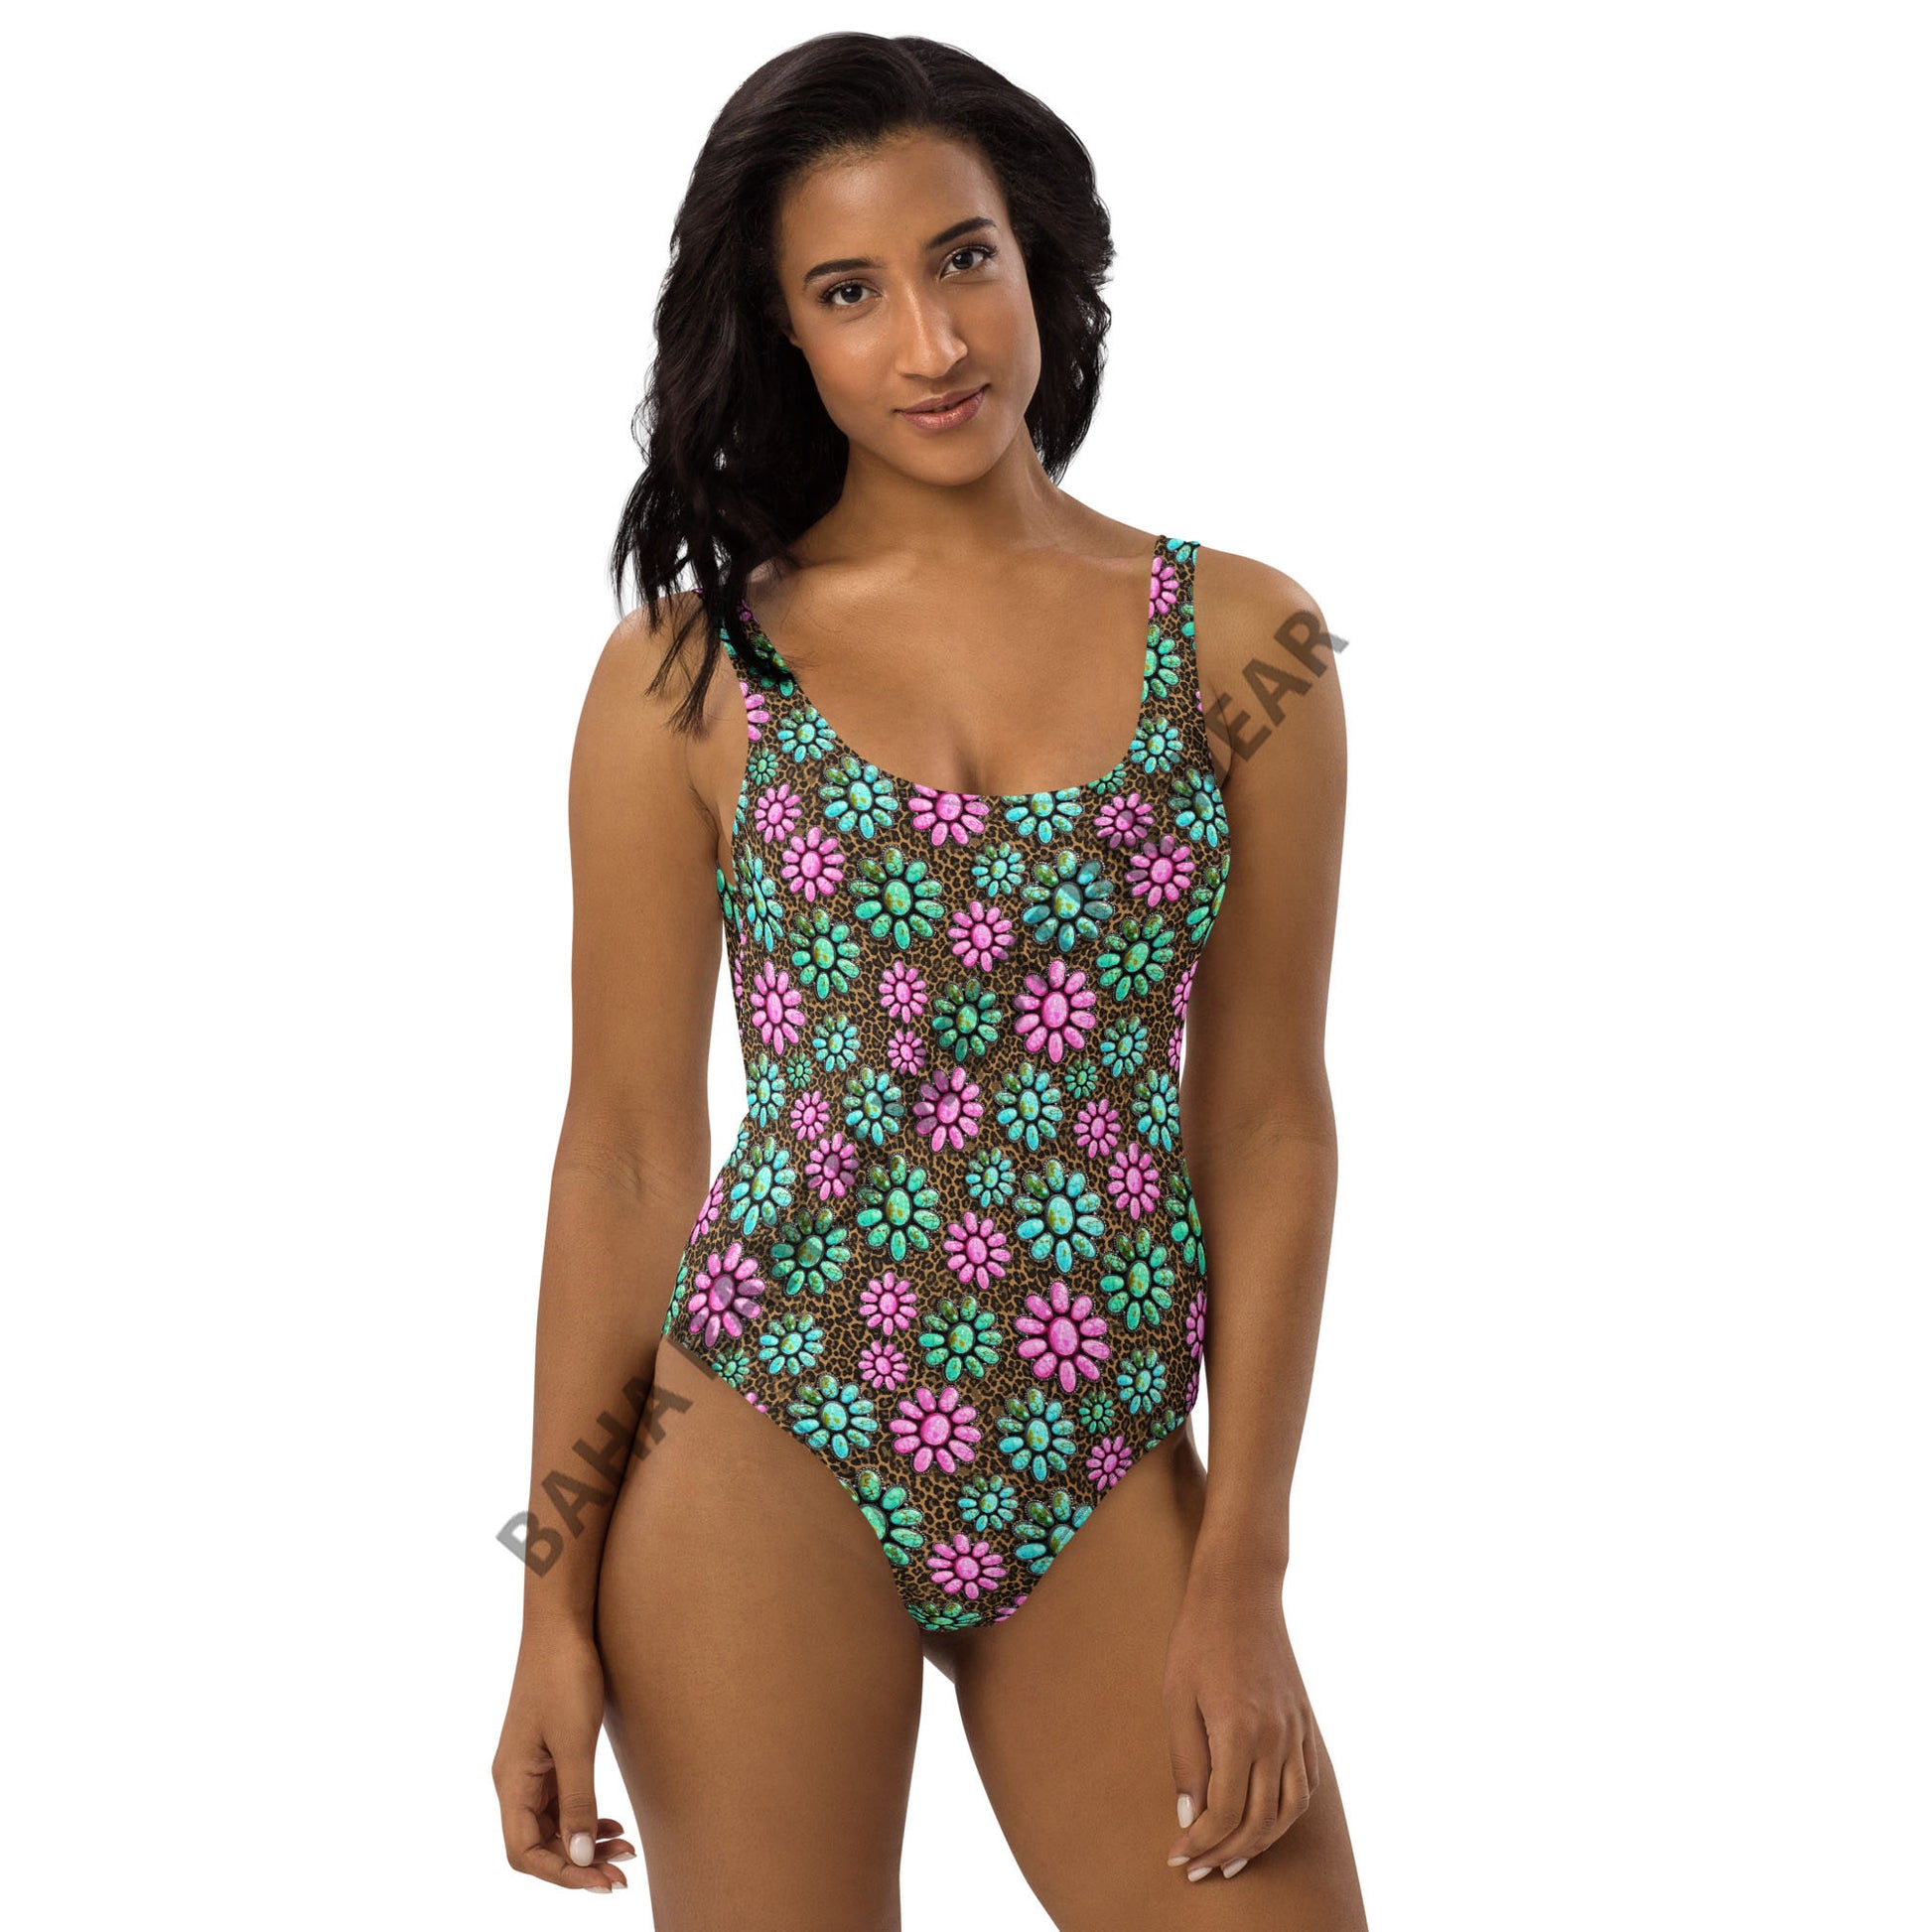 Yeehaw Pink Turquoise Cowgirl One-Piece Swimsuit - #swimmingsuit, #westernswimsuit, cowgirl, one piece, pink turquoise, southwestern, swim, swim suit, swim suits, swim waer, swim wear, swim wera, swimming, swimming suit, swimming suits, swimmingsuits, swimsuit, swimsuits, swimsuts, swimwaer, swimwear, turquoise, western -  - Baha Ranch Western Wear